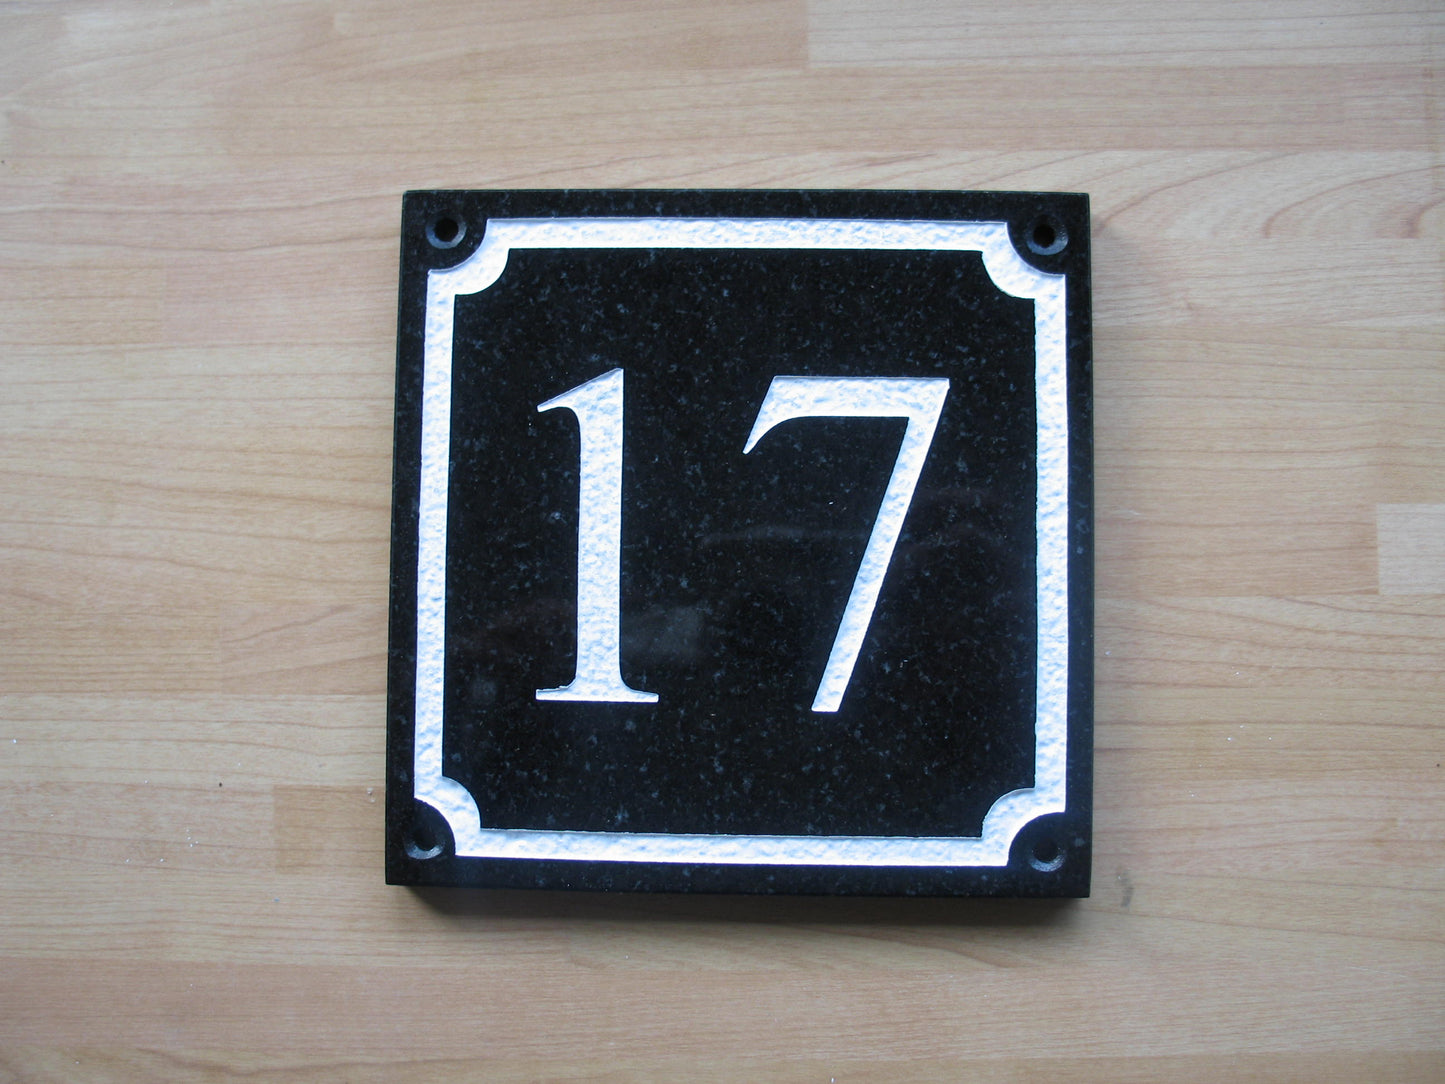 House number sign measuring 150mm x 150 mm using black Corian with a scalloped border and the address deep engraved and infilled with white monument paint